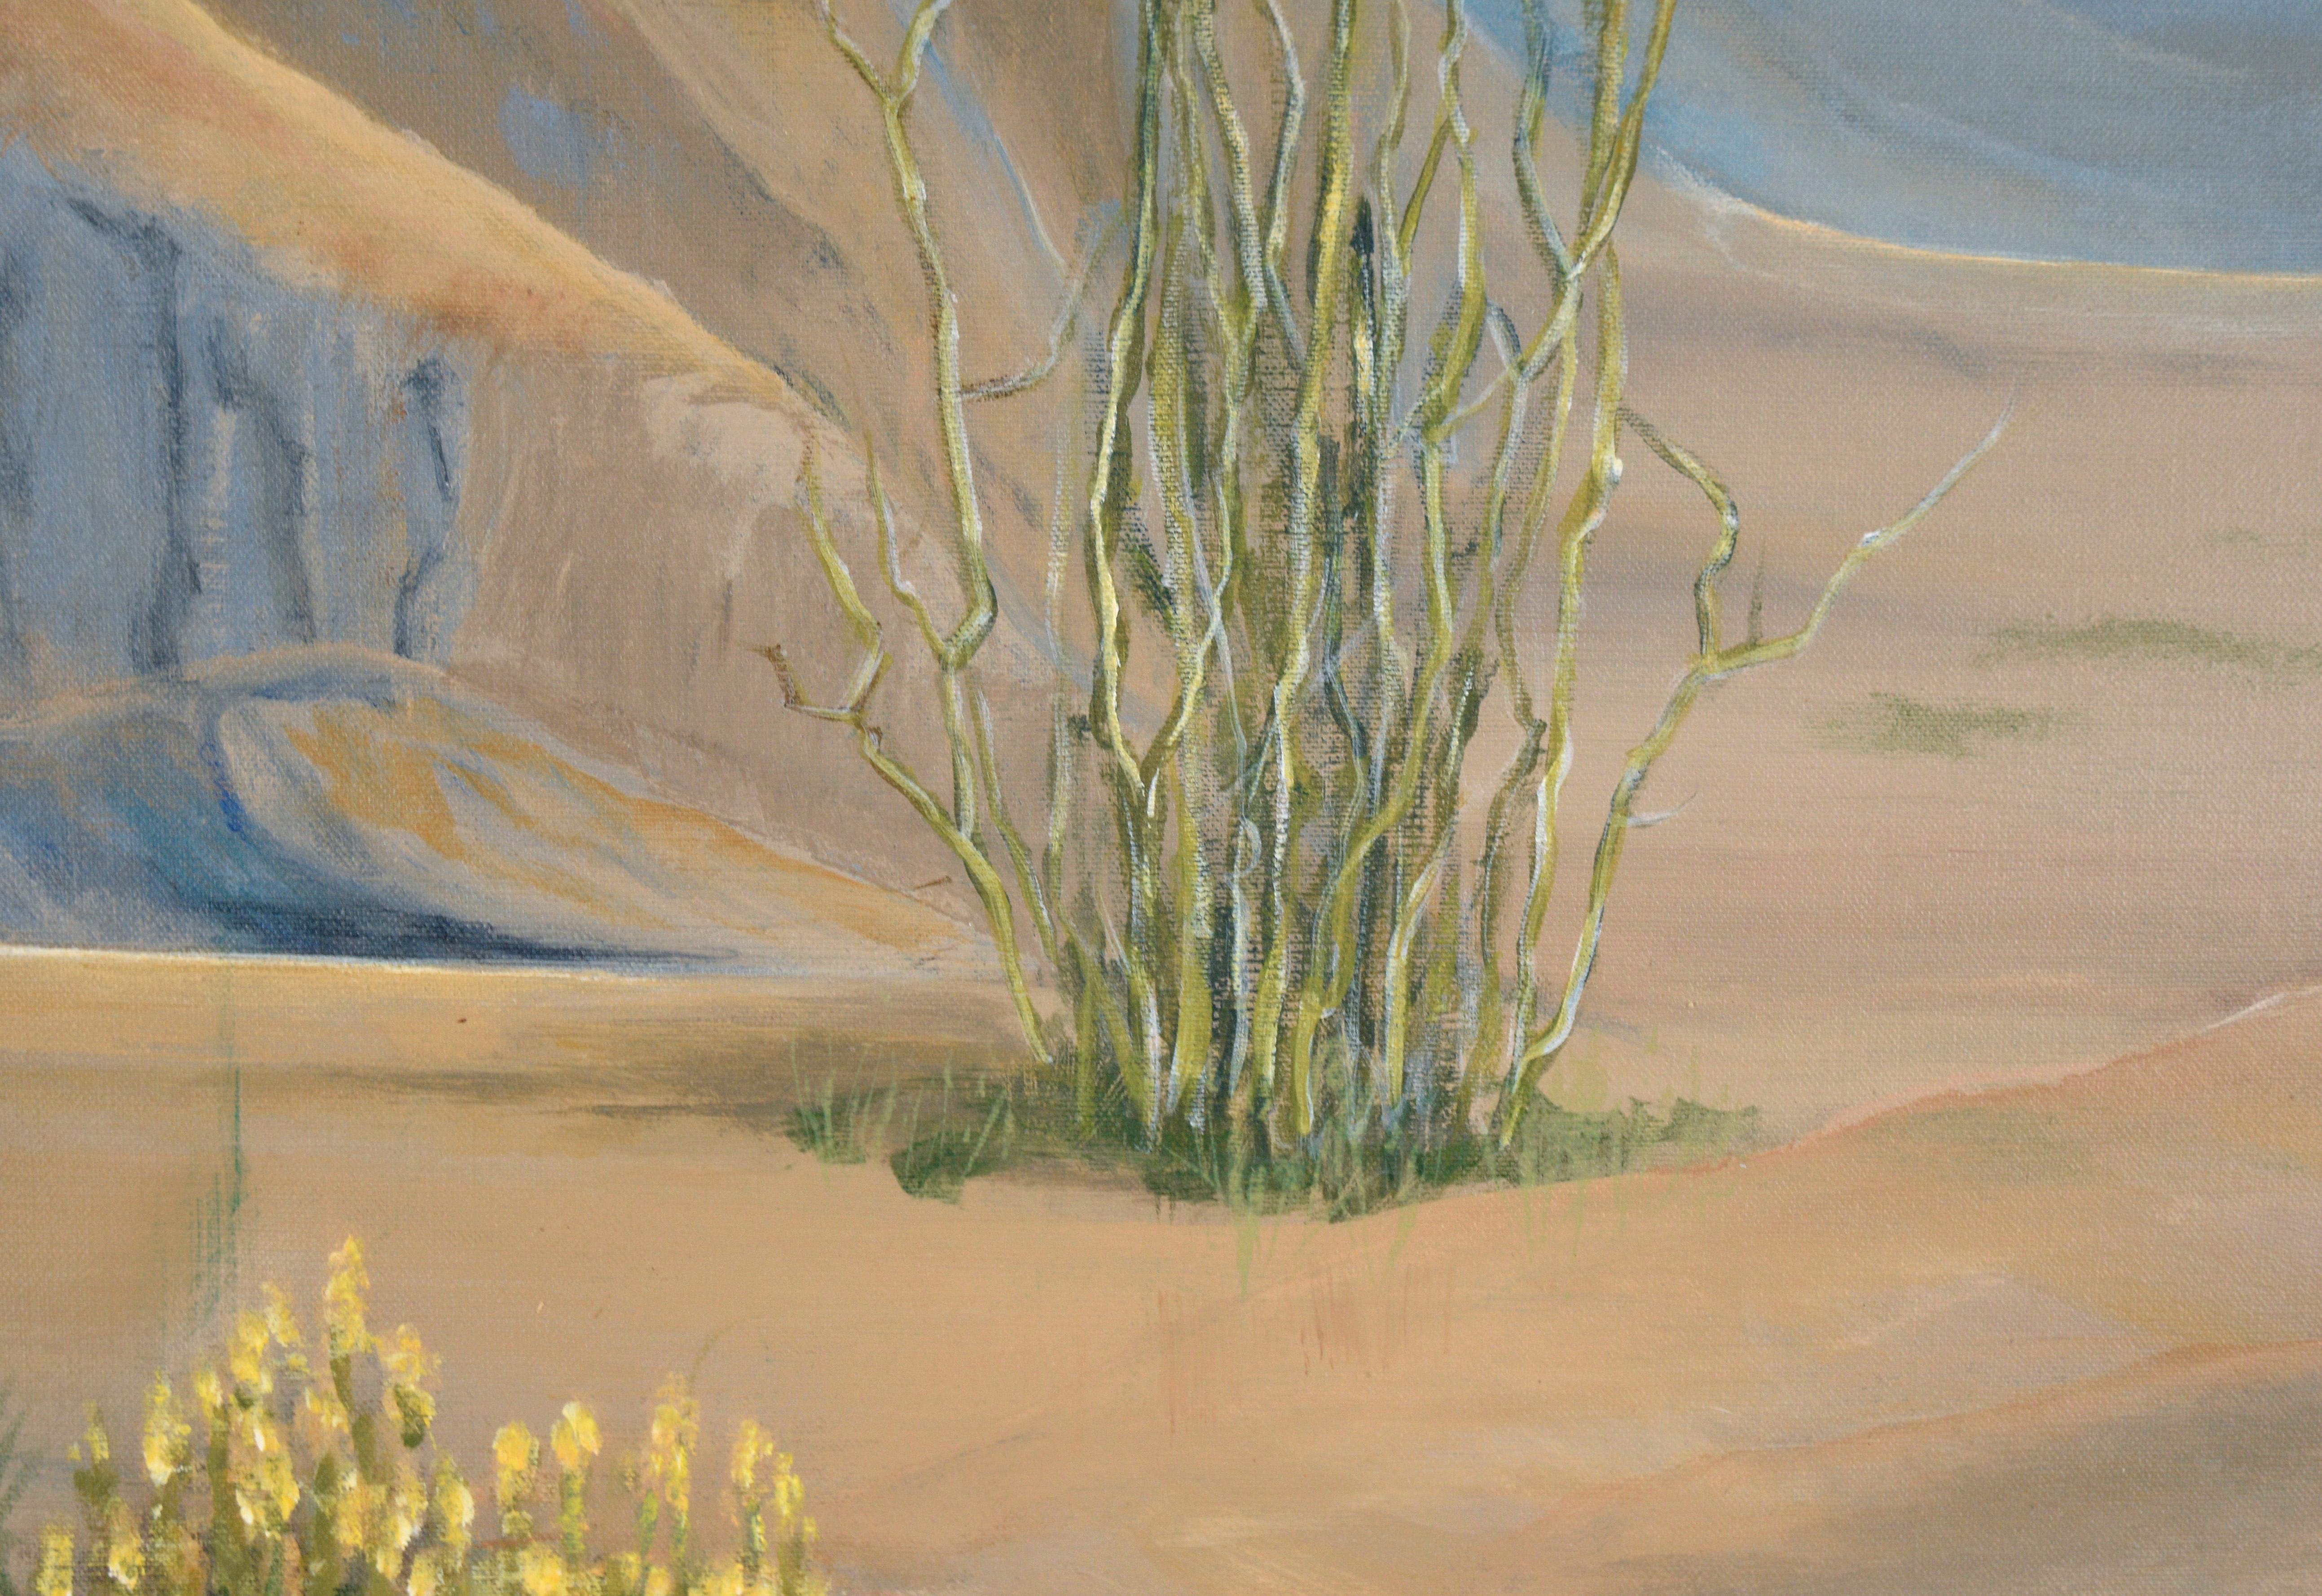 Desert Foothills Under a Blue Sky - Landscape in Acrylic on Canvas For Sale 4